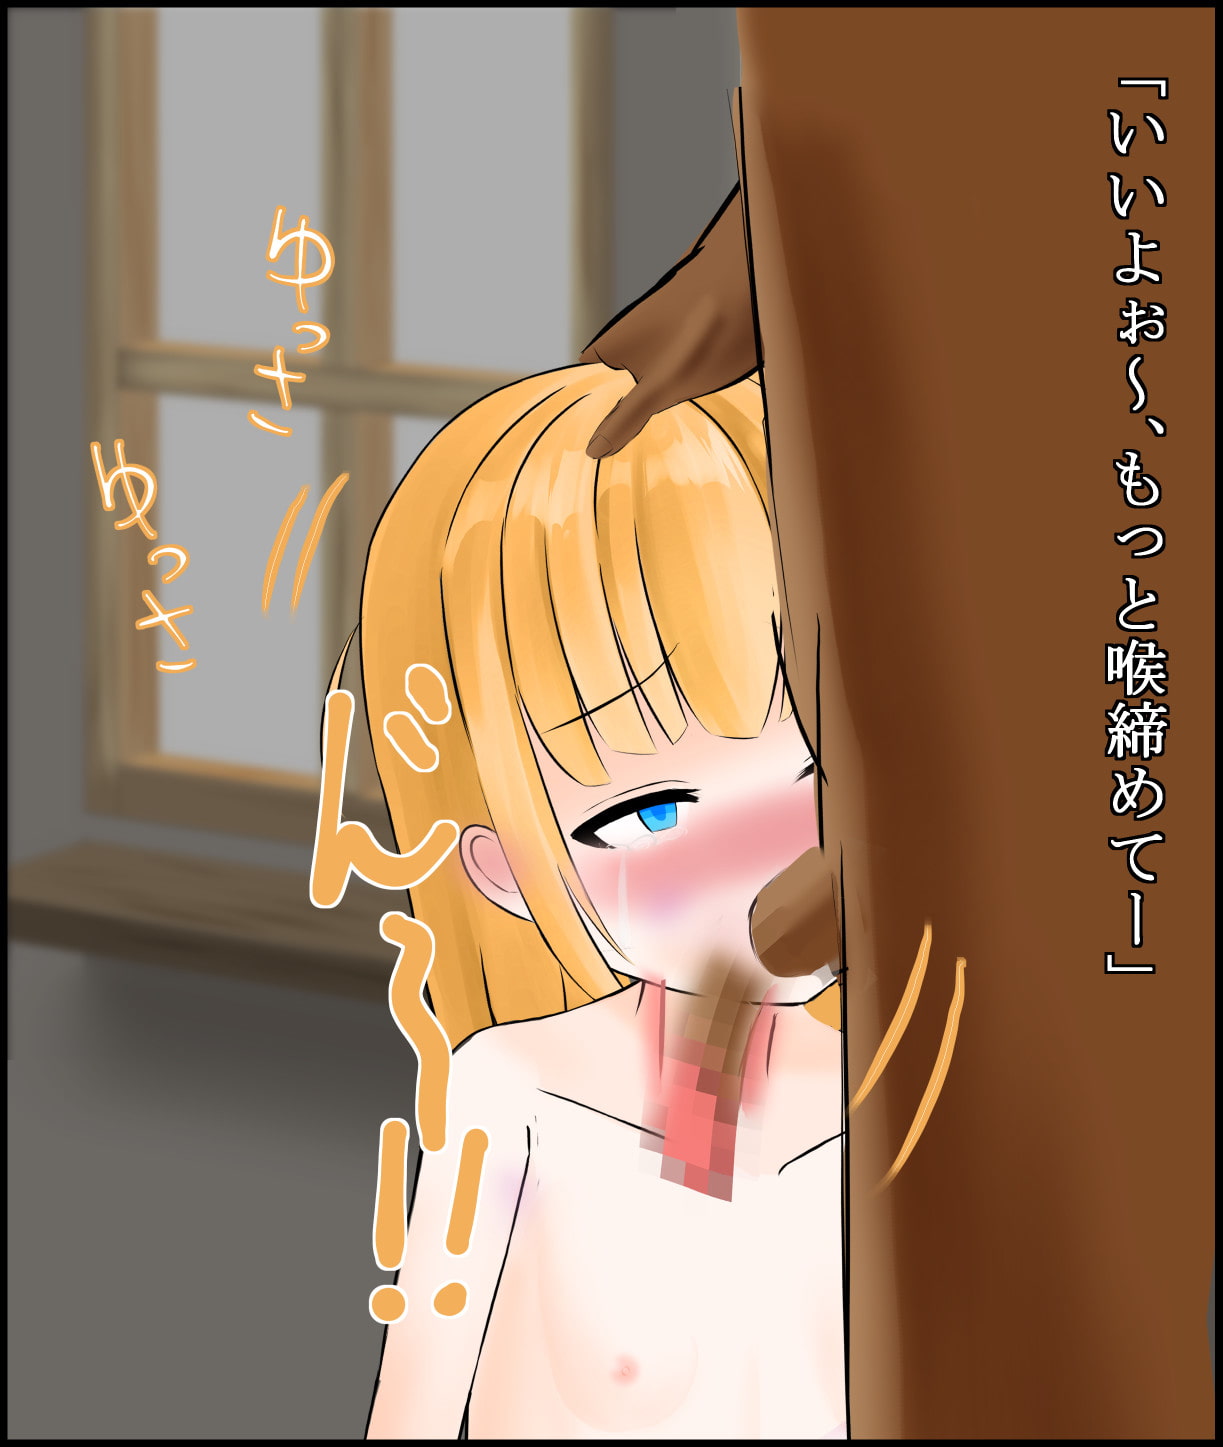 Just Loli Mouth Penetration